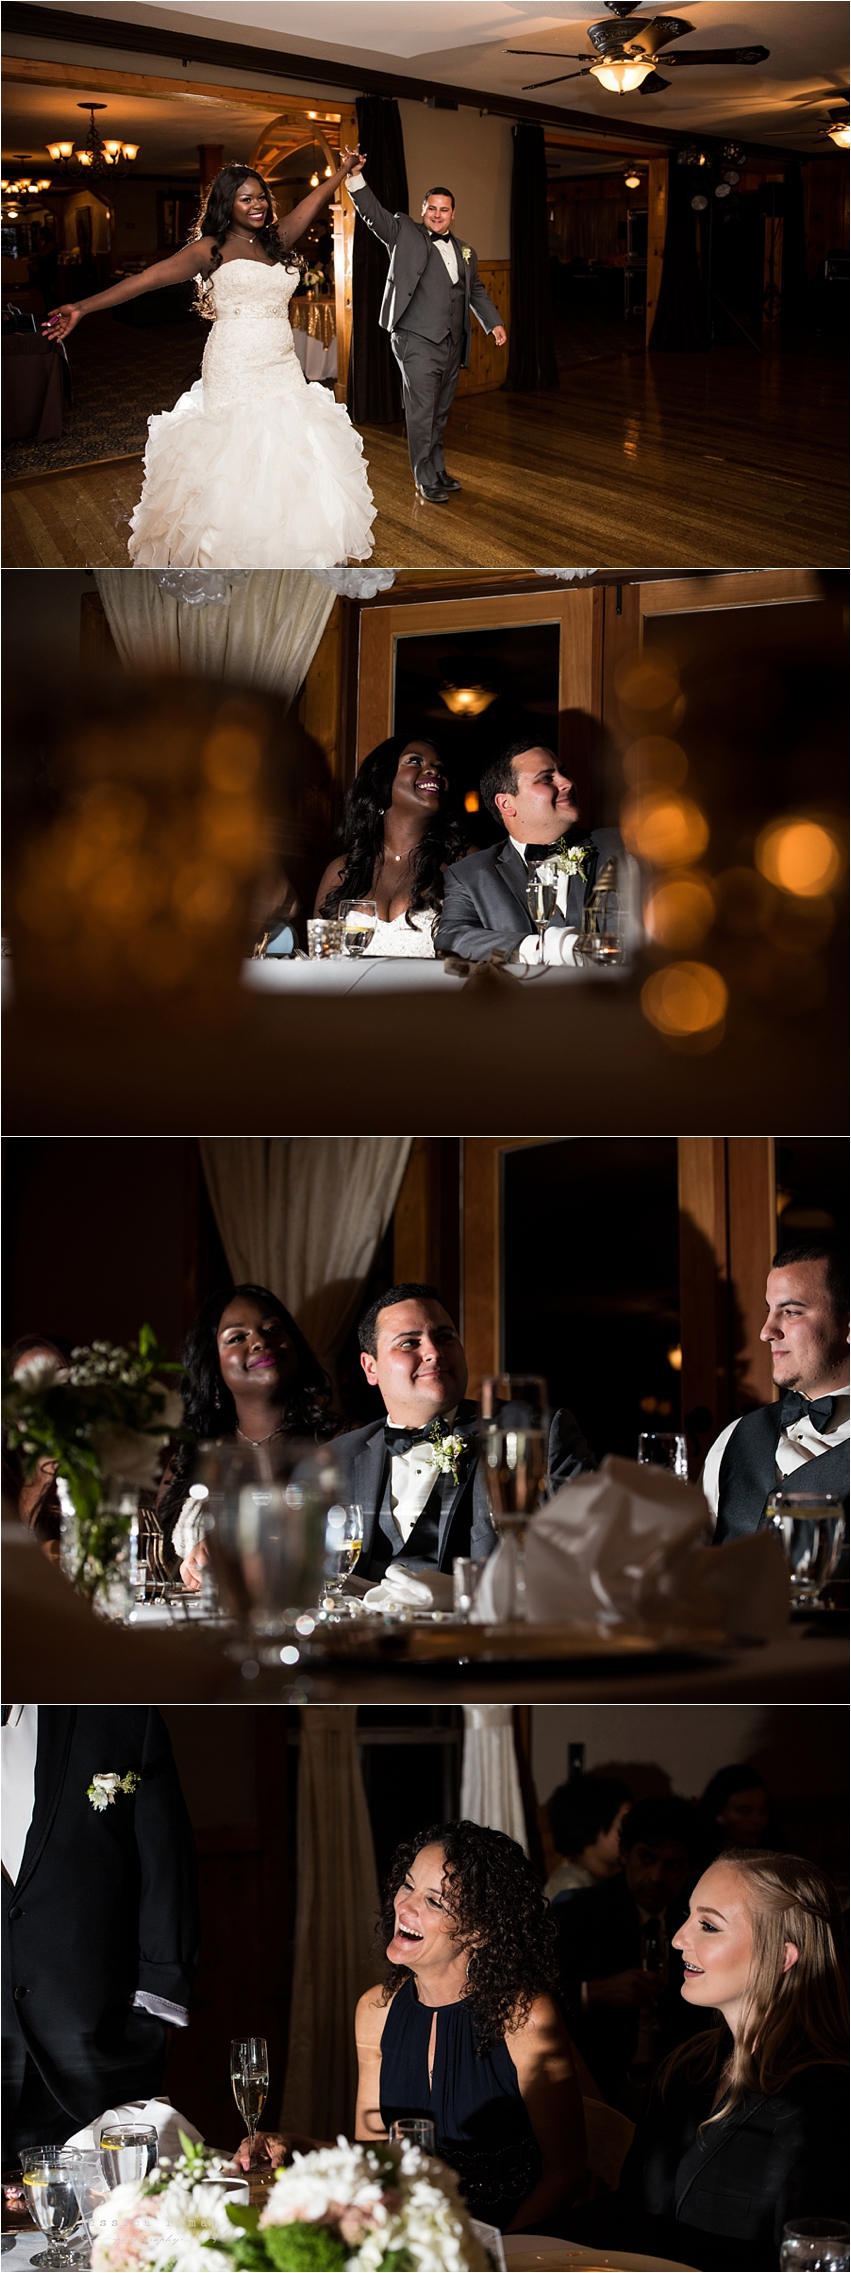 Jessica Roman Photography - Addy & Dominick wedding at Forest House Lodge